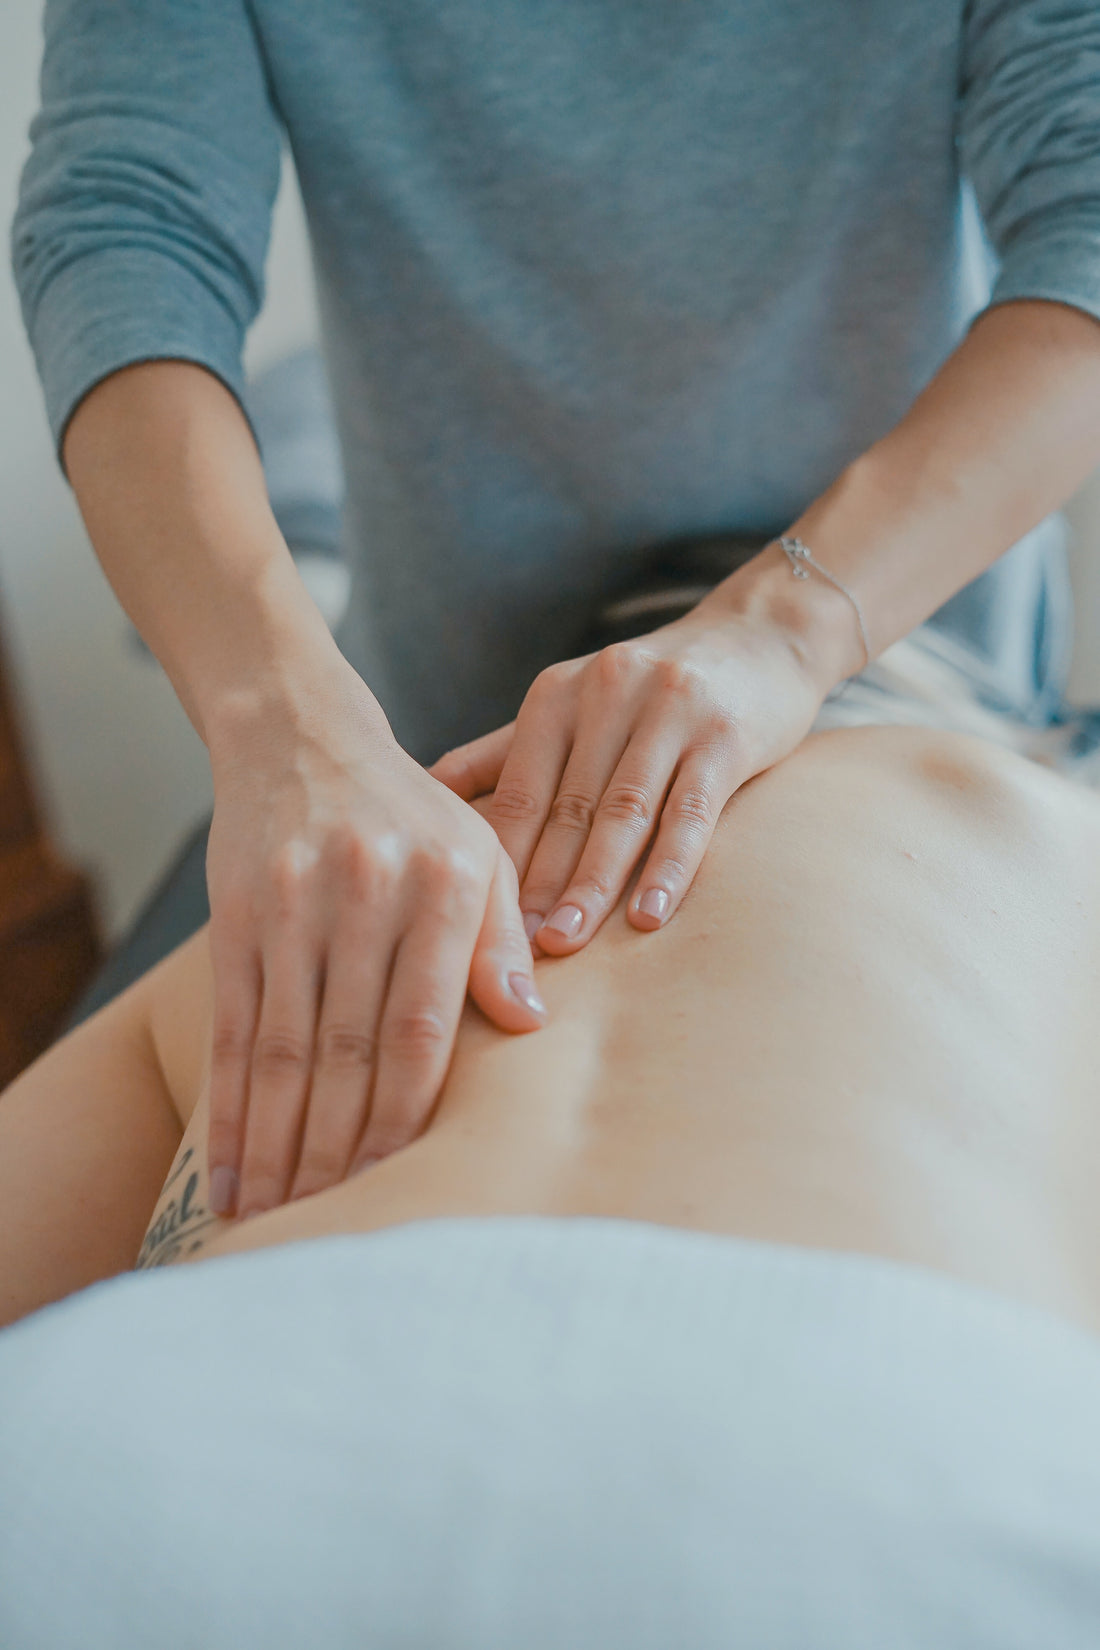 Can a couple’s massage really help improve their intimacy?